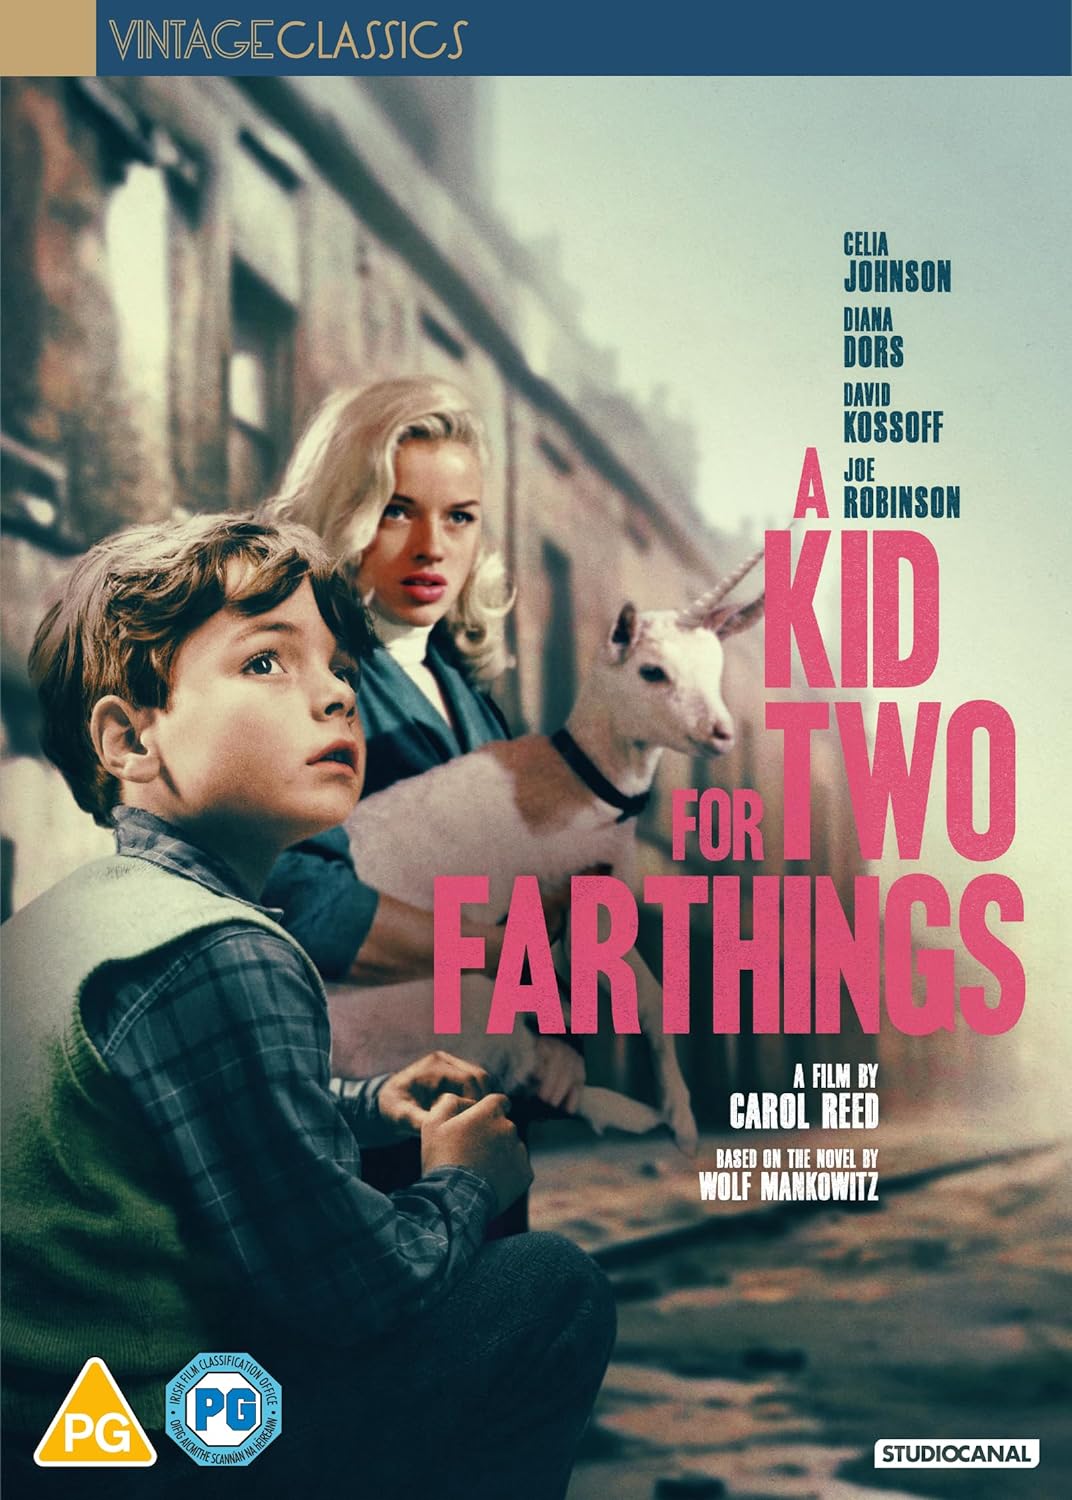 A_Kid_for_Two_Farthings_DVD_cover